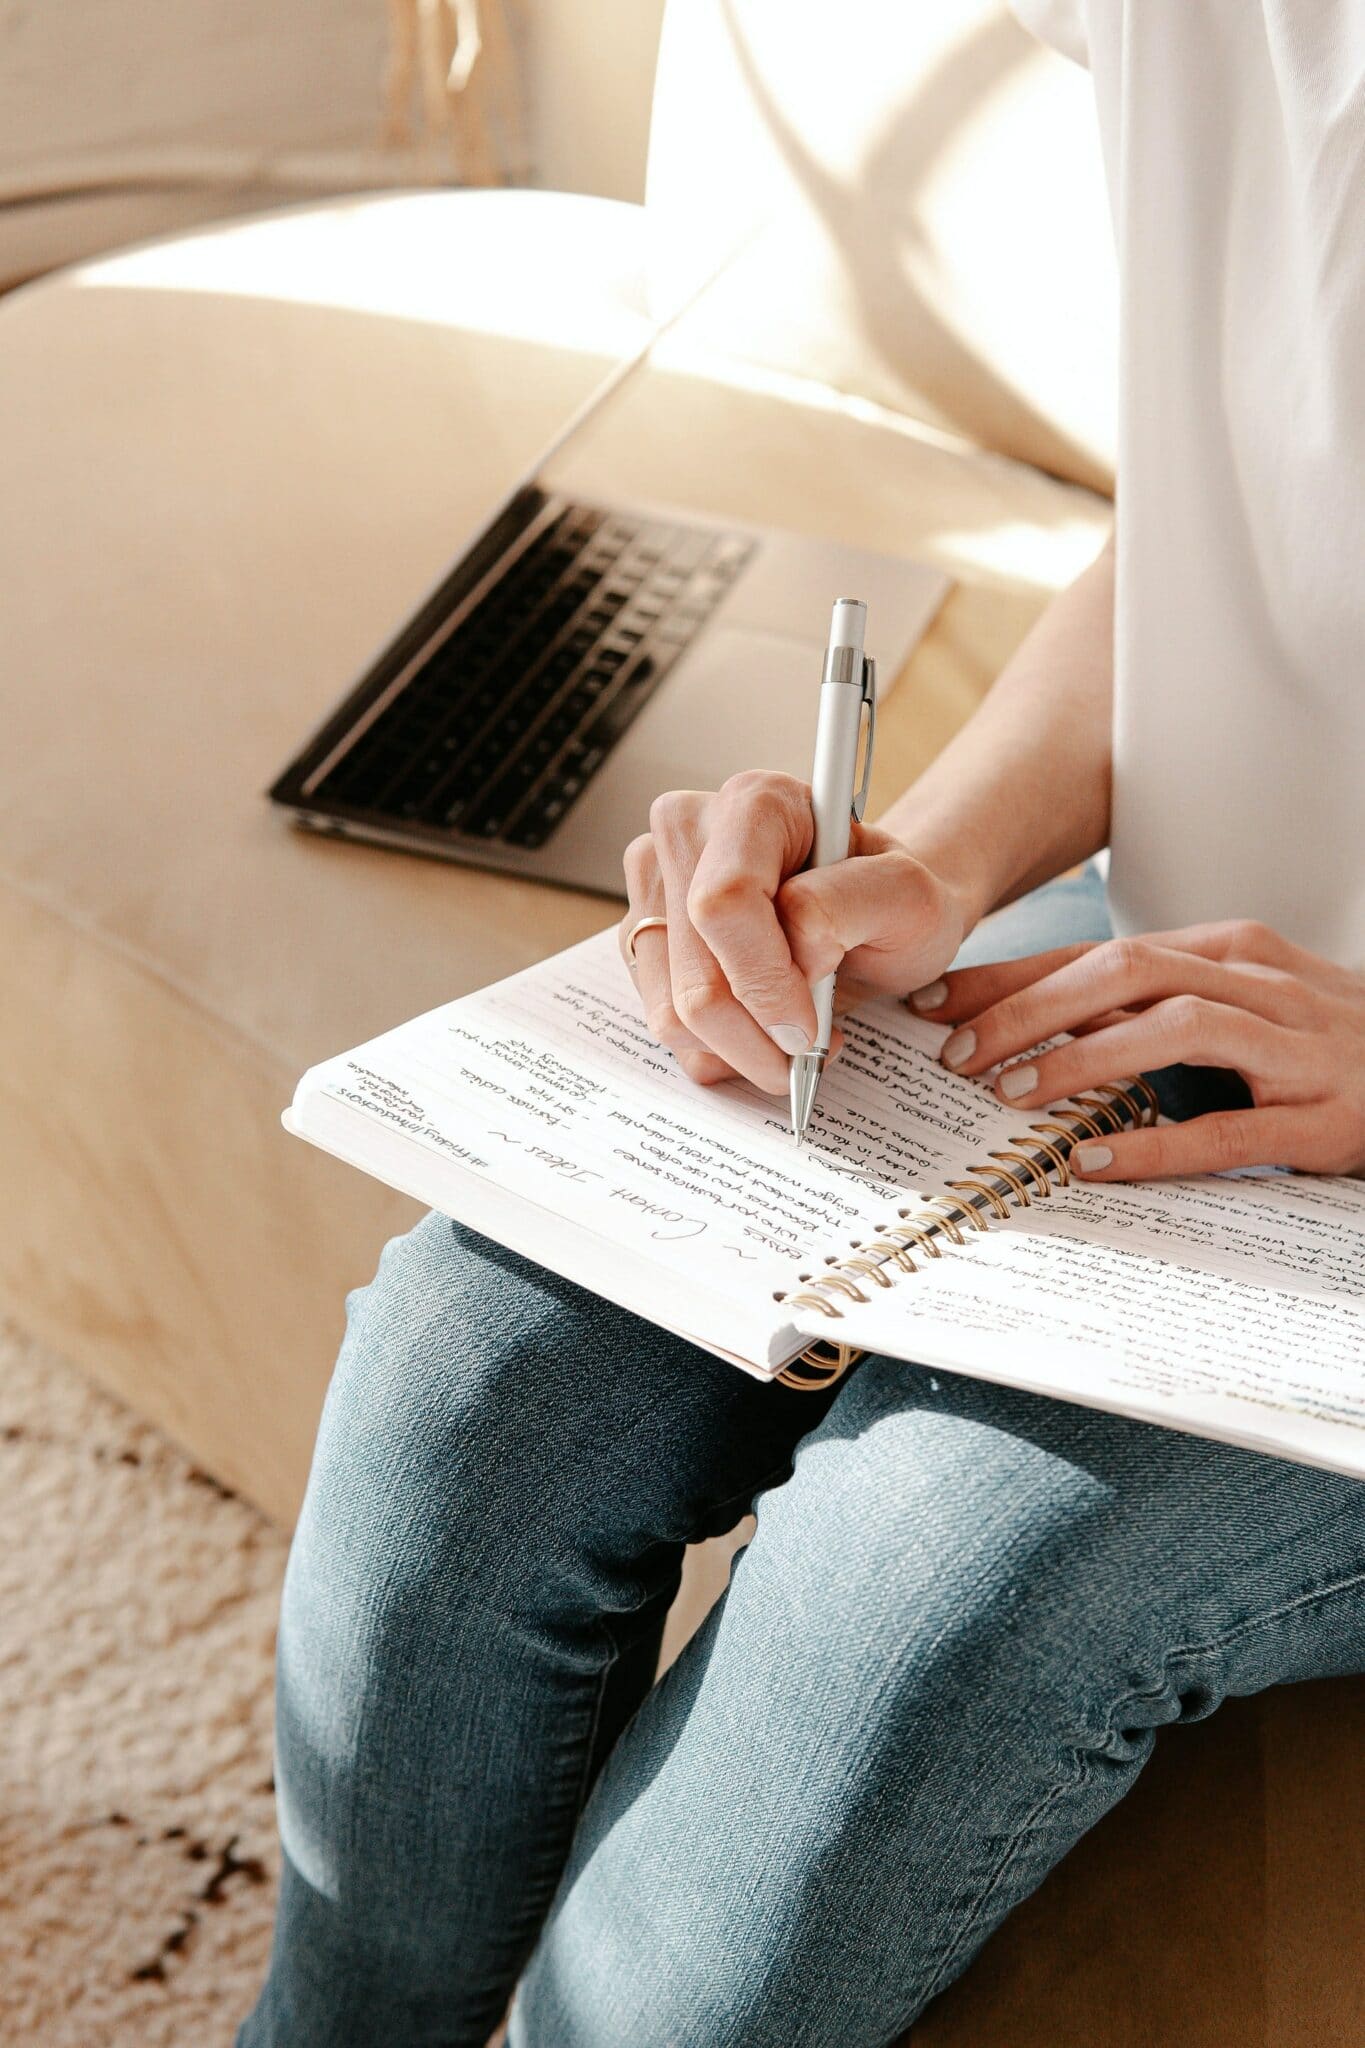 Woman sitting on side of bed, writing in a notebook